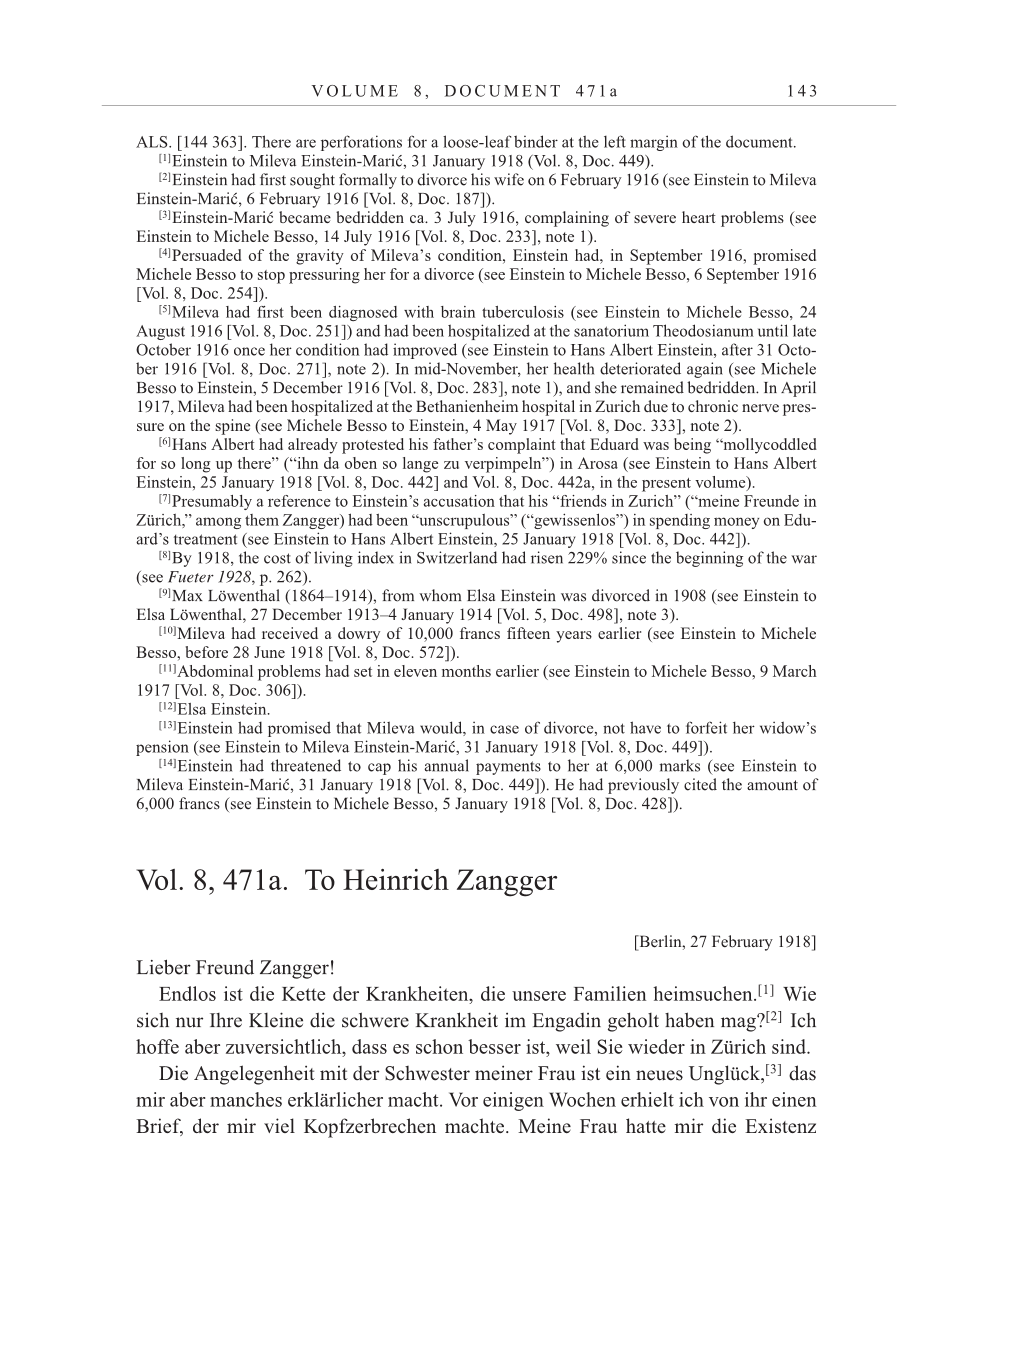 Volume 10: The Berlin Years: Correspondence May-December 1920 / Supplementary Correspondence 1909-1920 page 143